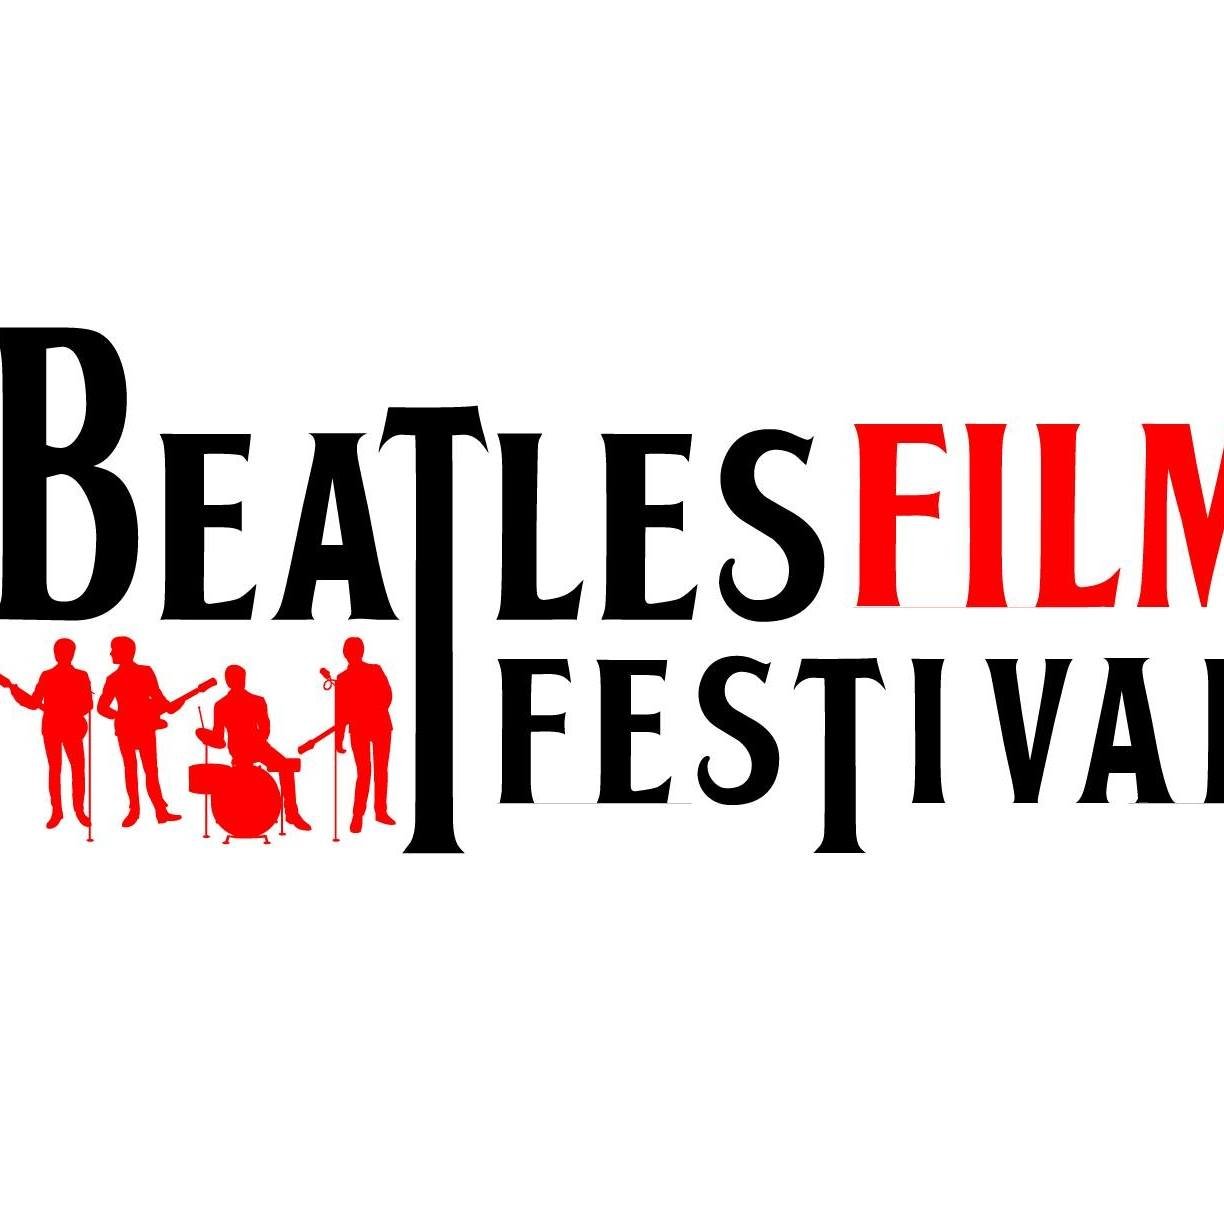 The Beatles Film Festival is a touring festival of feature-length documentaries that each trace the musical, social & cultural influence of the legendary band.